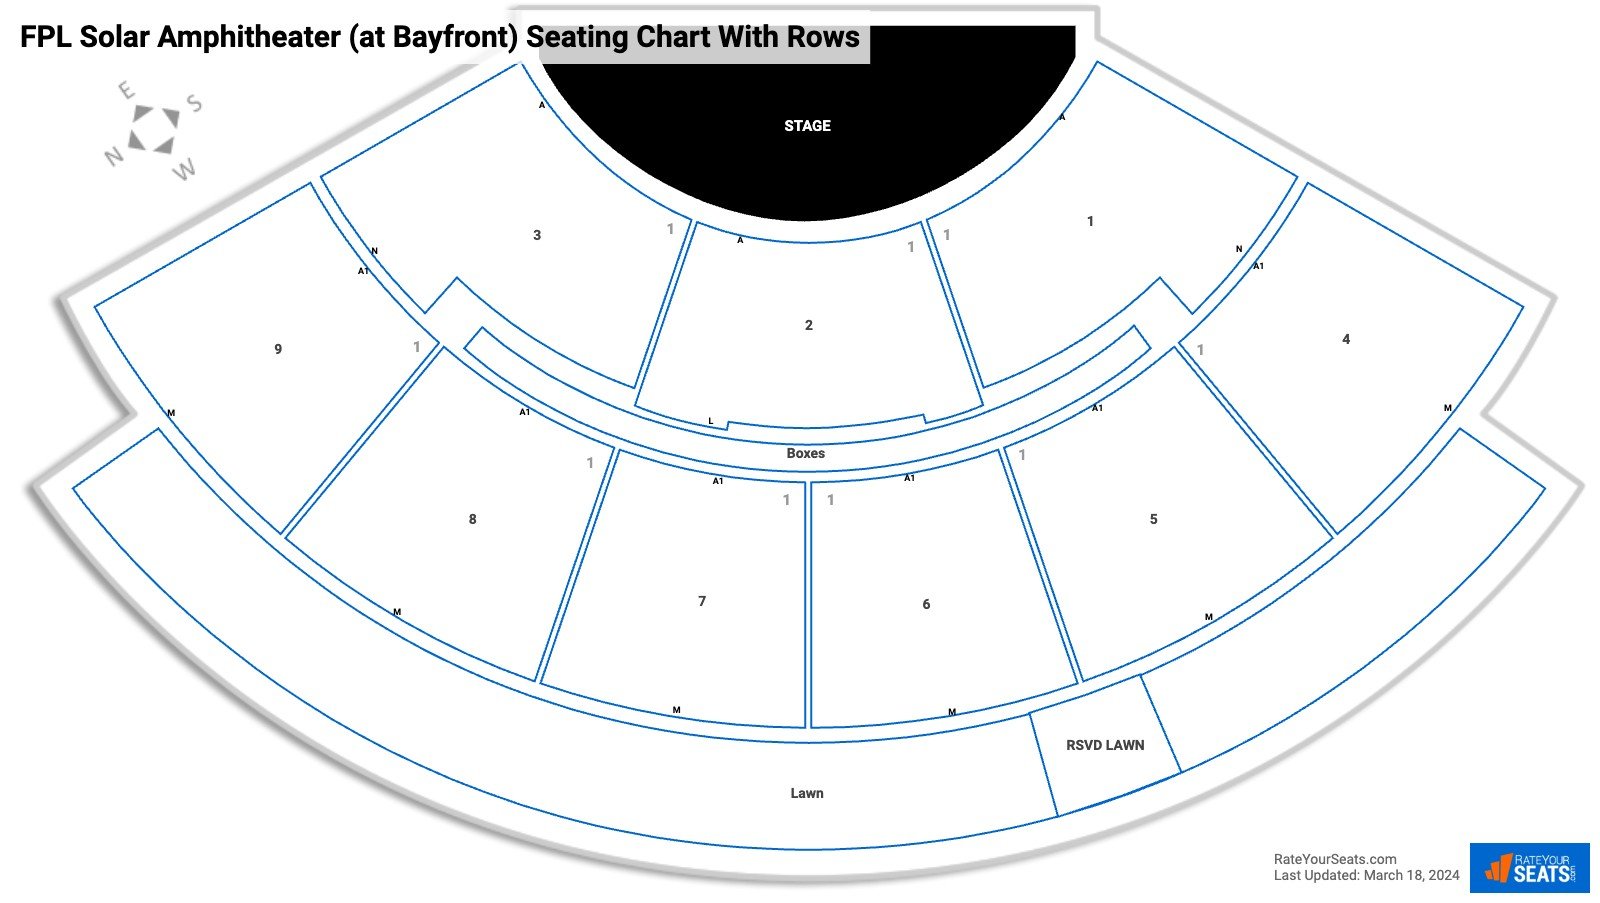 FPL Solar Amphitheater (at Bayfront) seating chart with row numbers